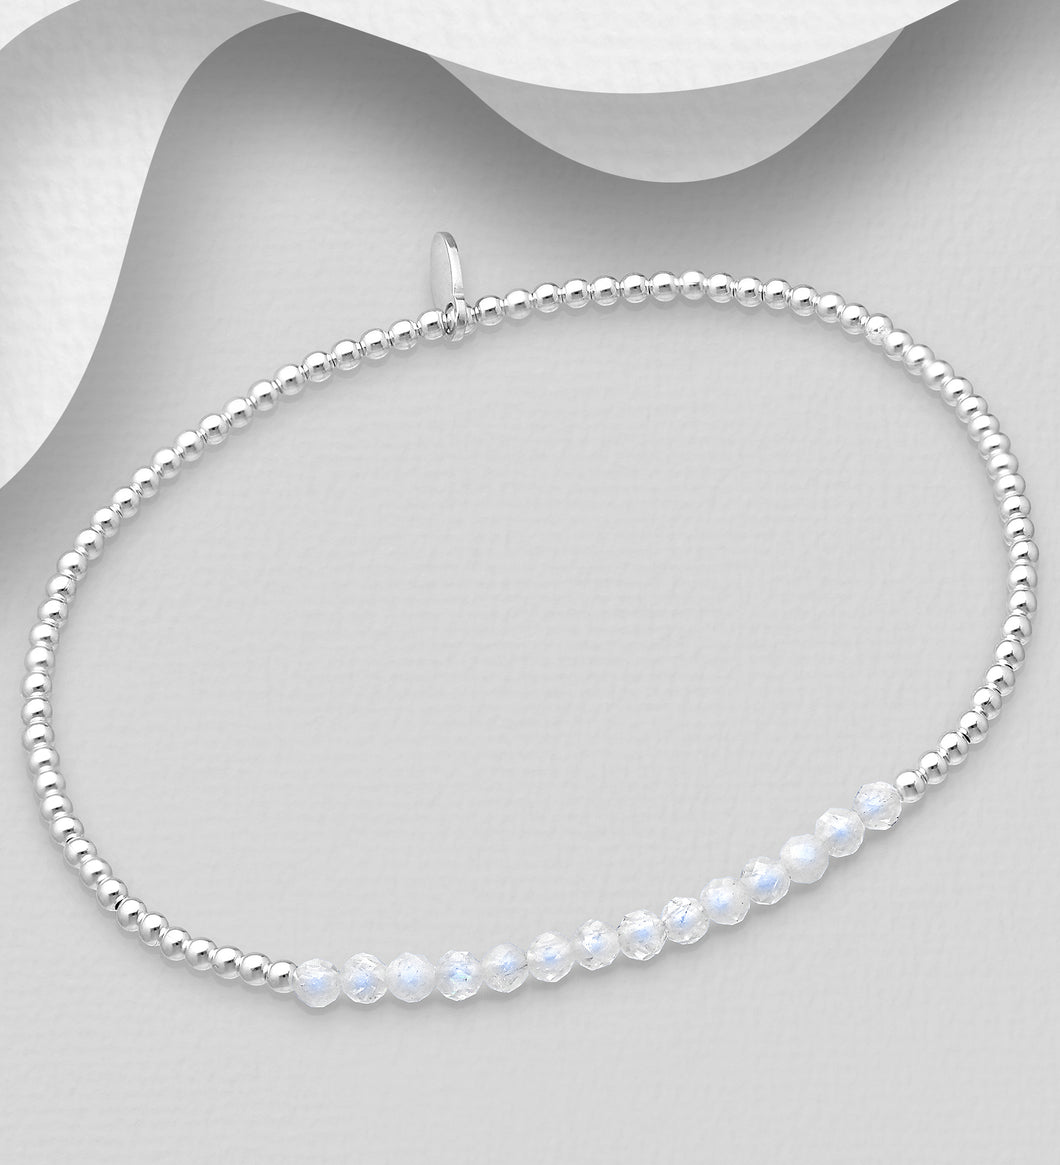 Silver Stretch Bracelet with Moonstone